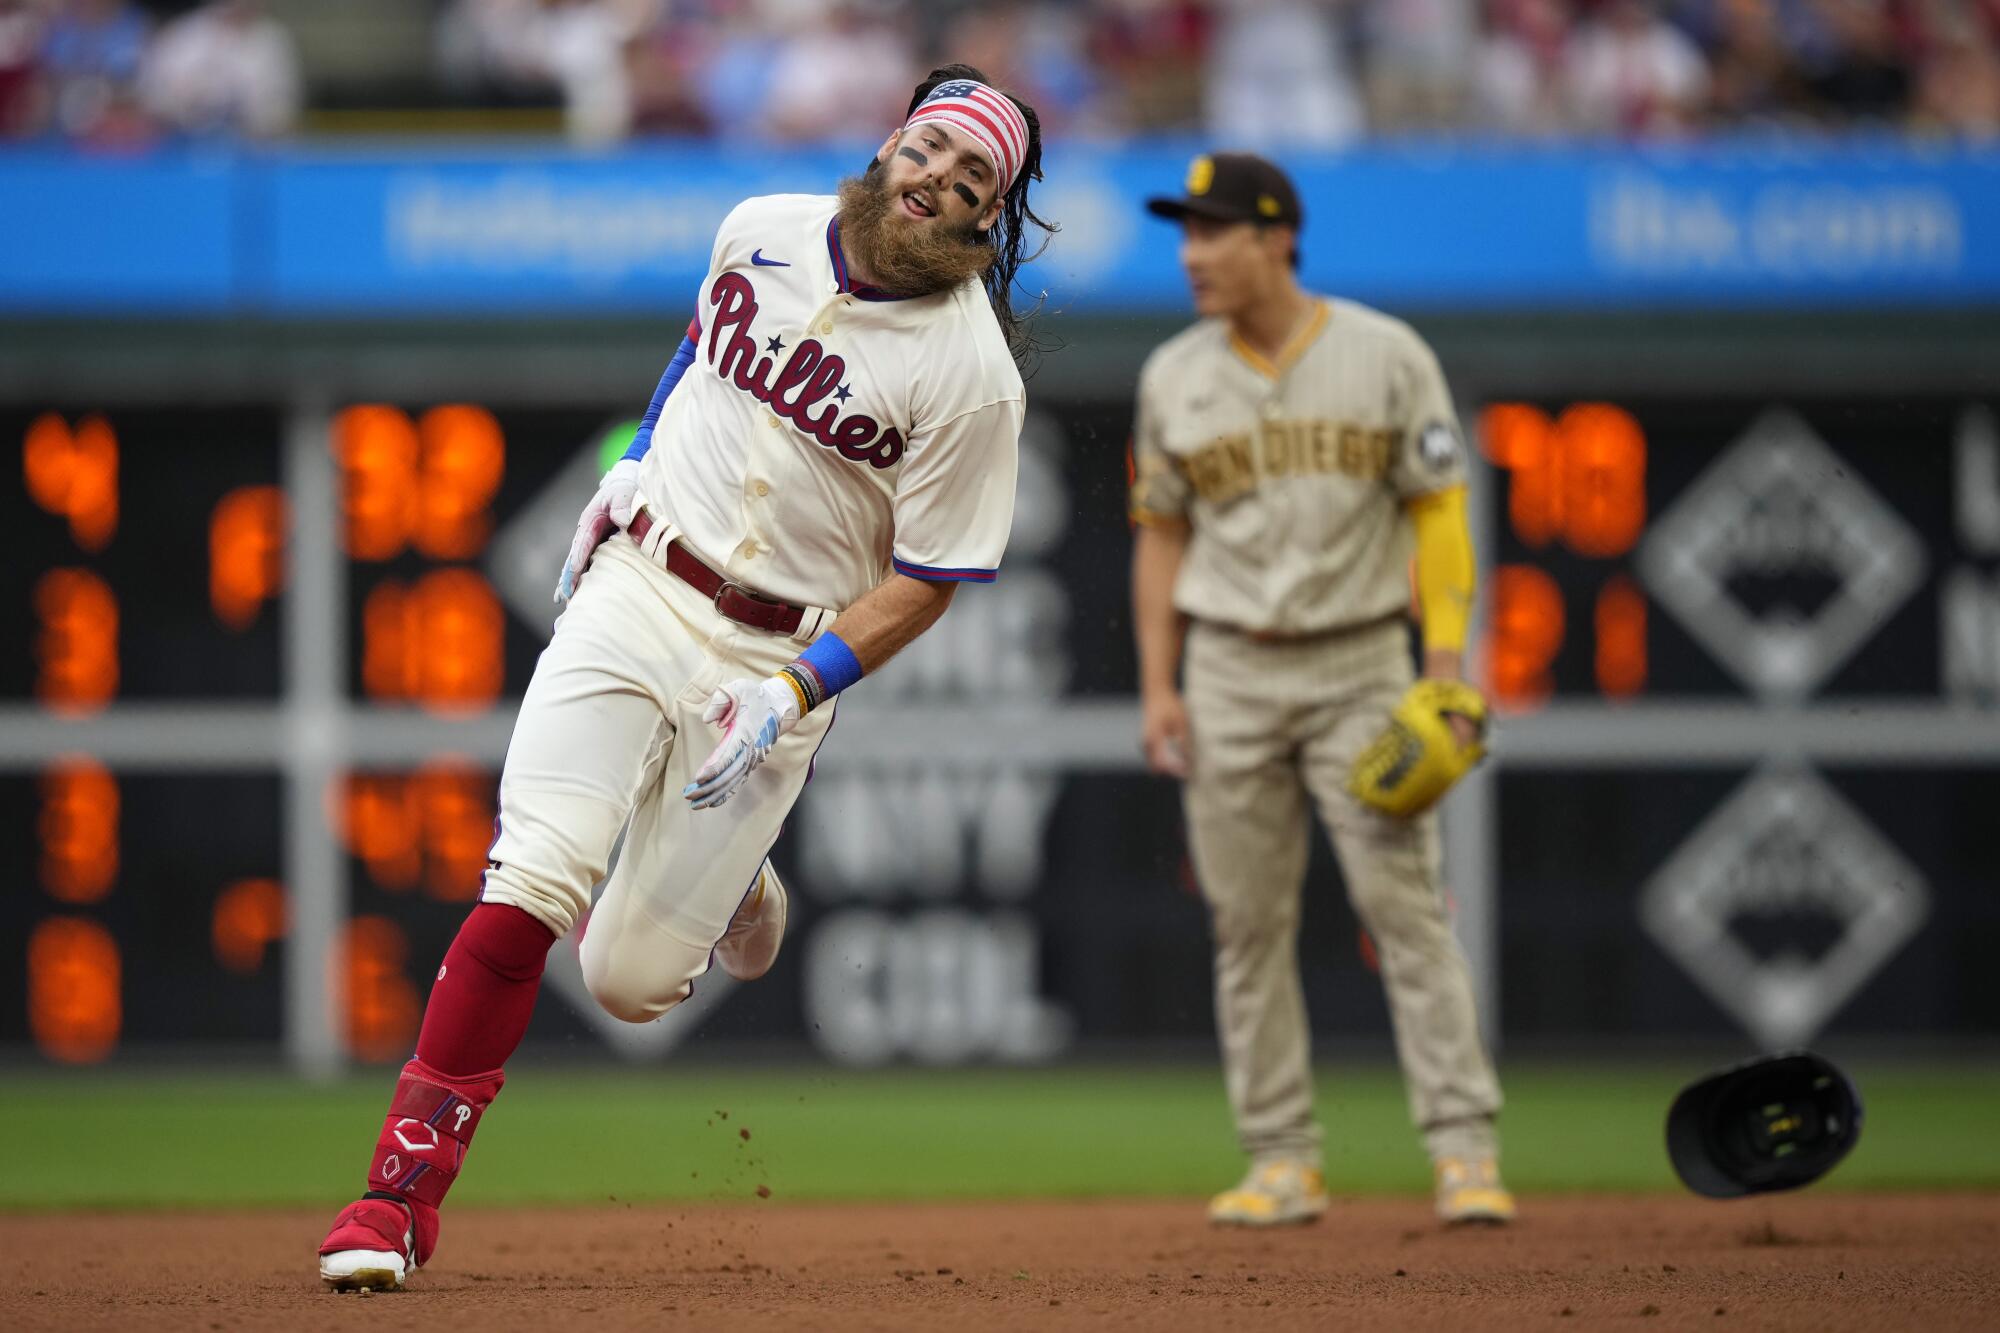 Kyle Schwarber's sacrifice fly pushes Phillies past Padres, who lose again  in extra innings - The San Diego Union-Tribune